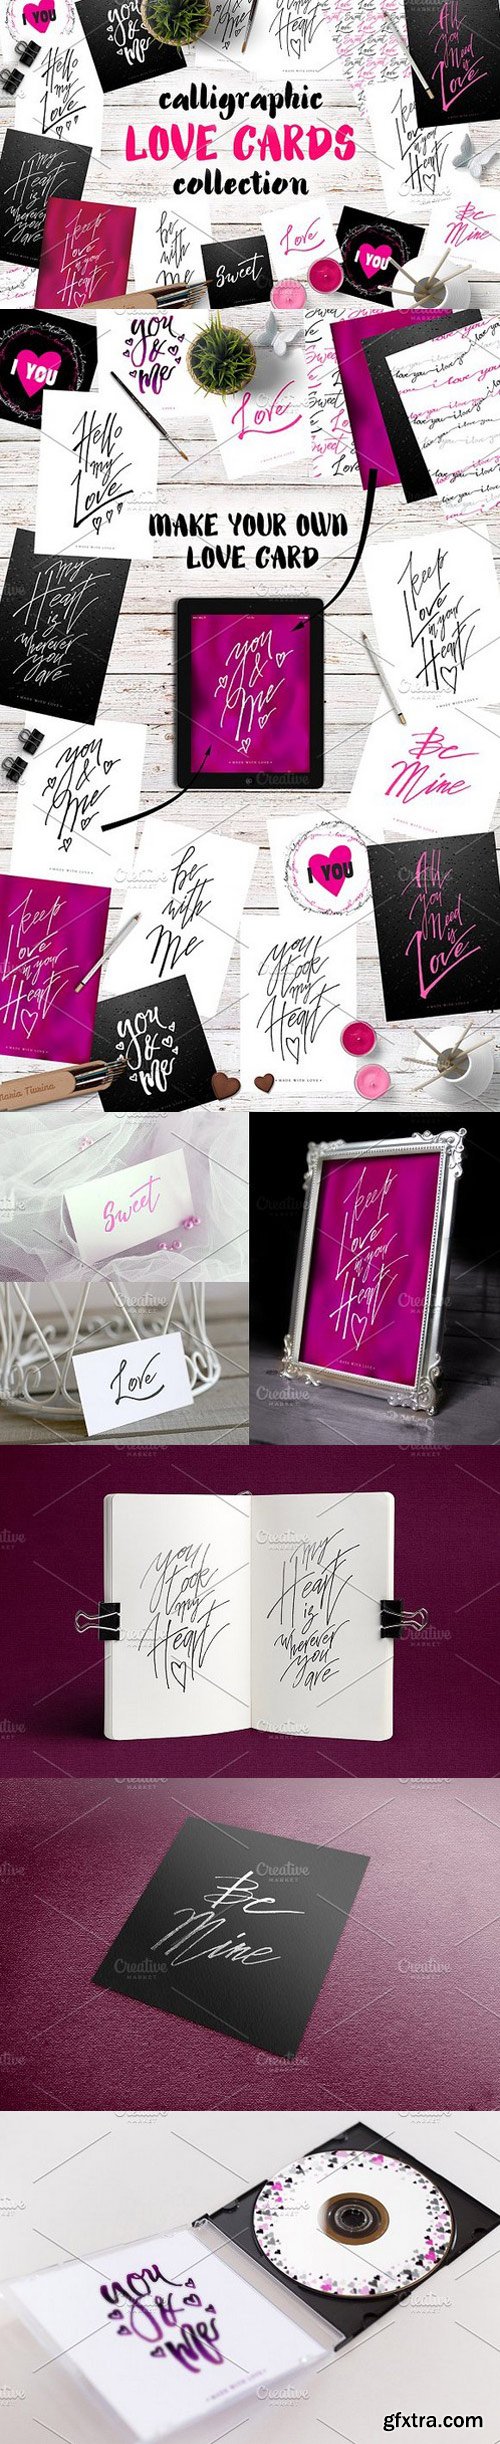 CM - Calligraphy Love Cards 1191751